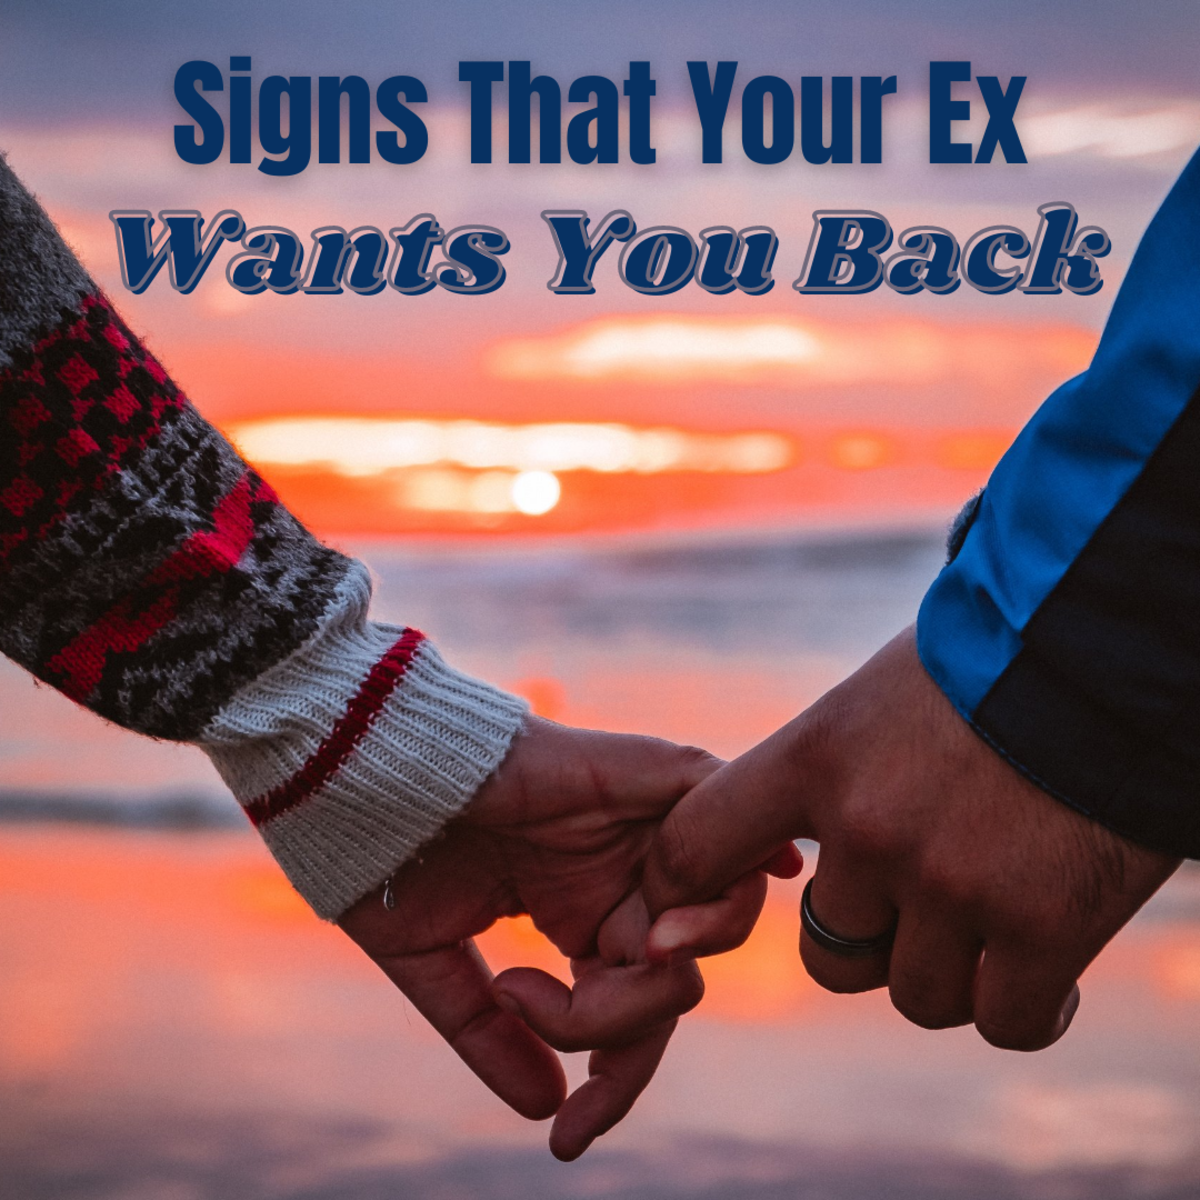 Does your ex still love you and want you back?